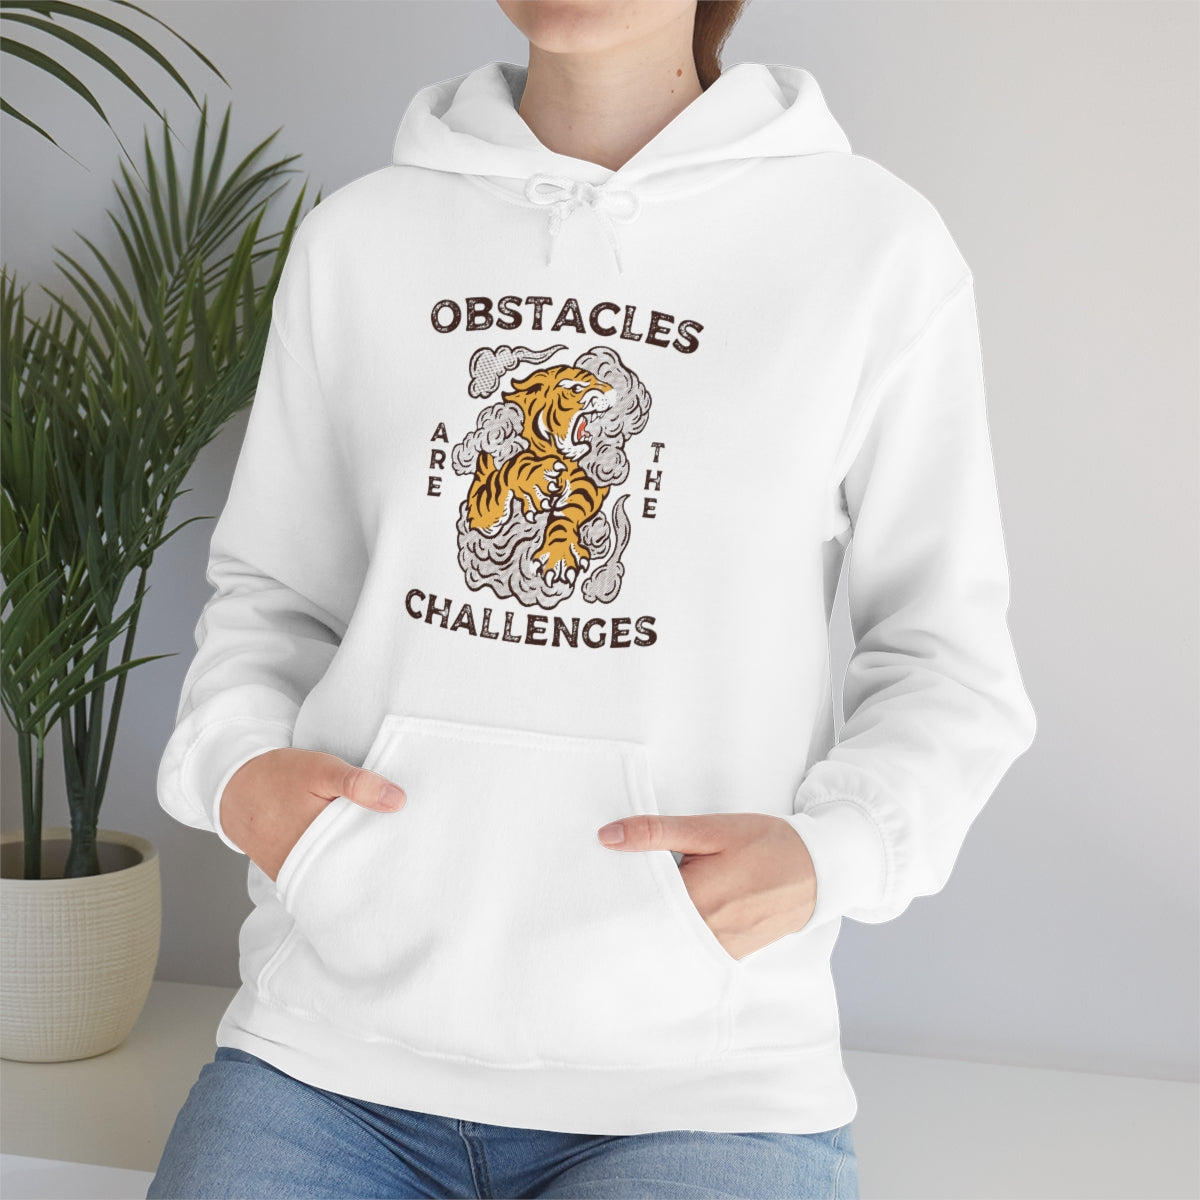 Obstacles Are the Challenge